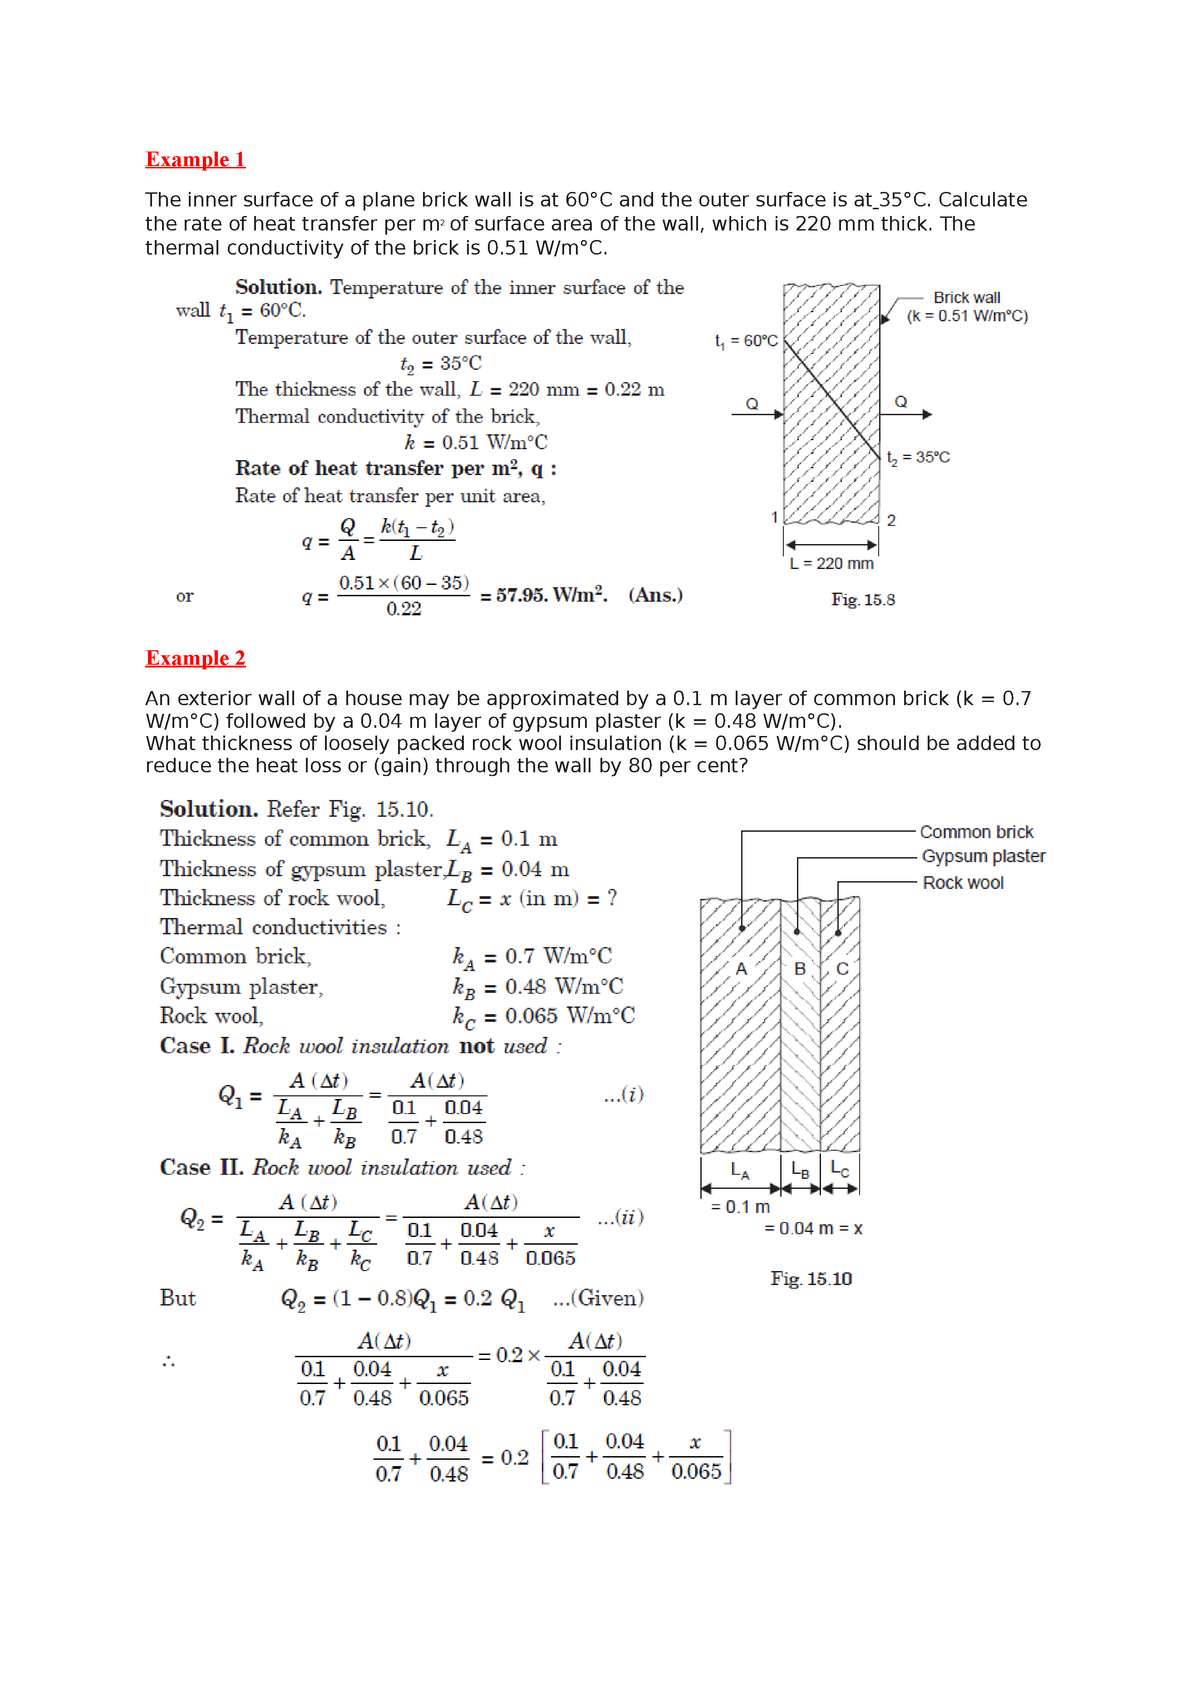 Convection, examples - Heat transfer - The inner surface of a plane ...